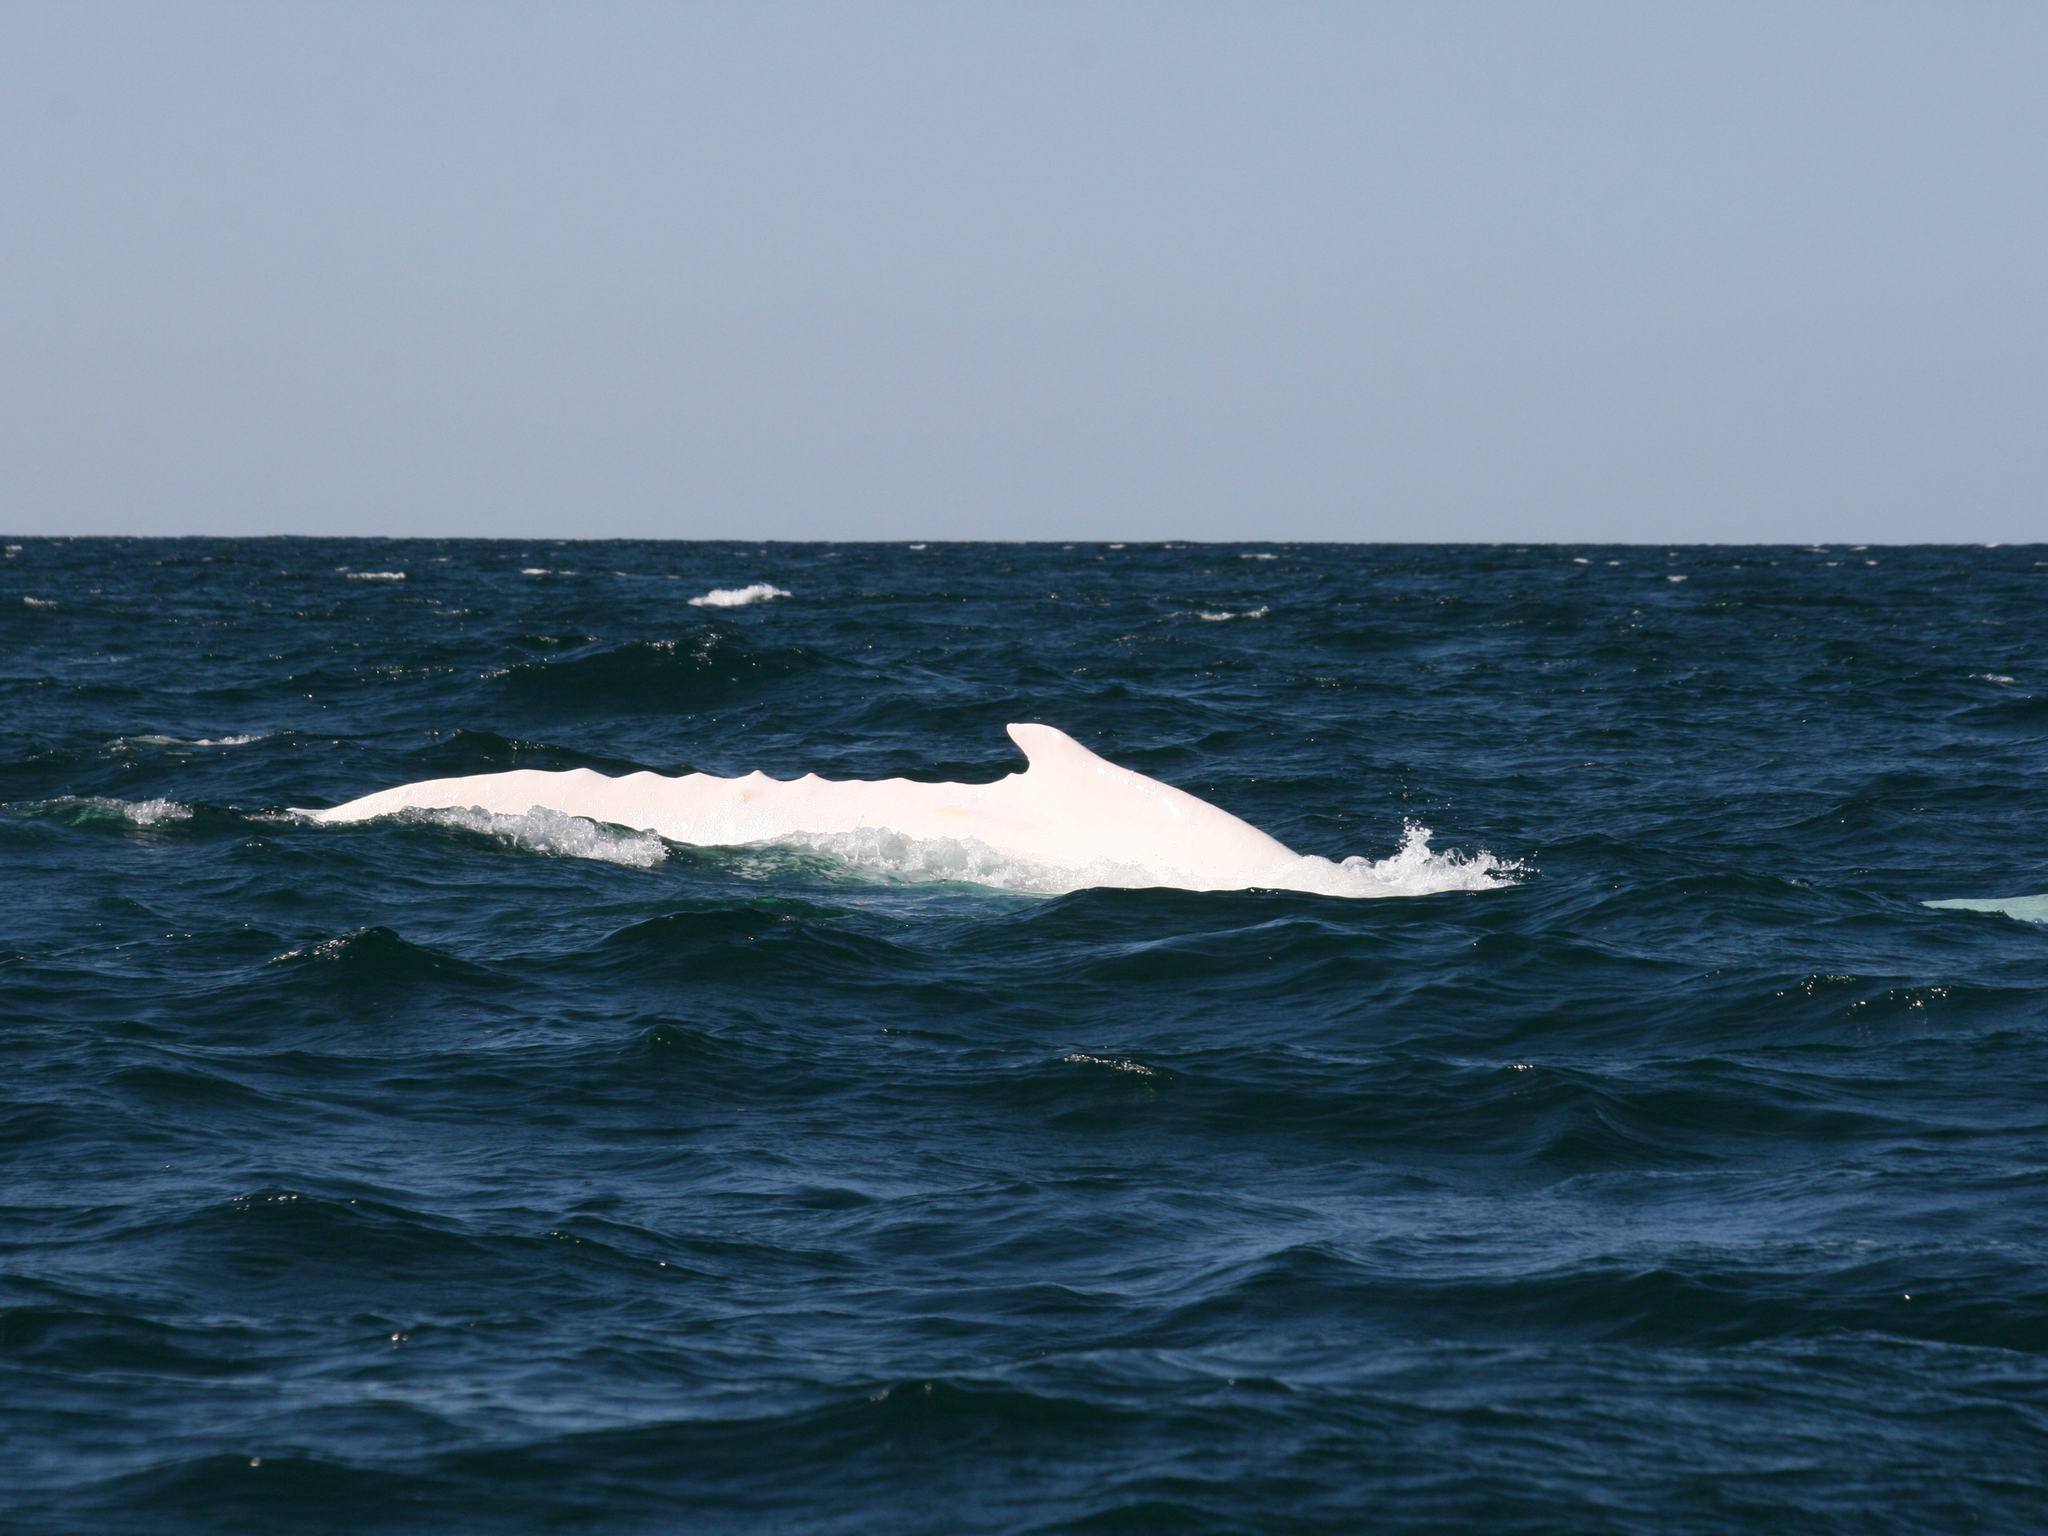 A sighting of the legendary white humpback whale, Migaloo, from 2009